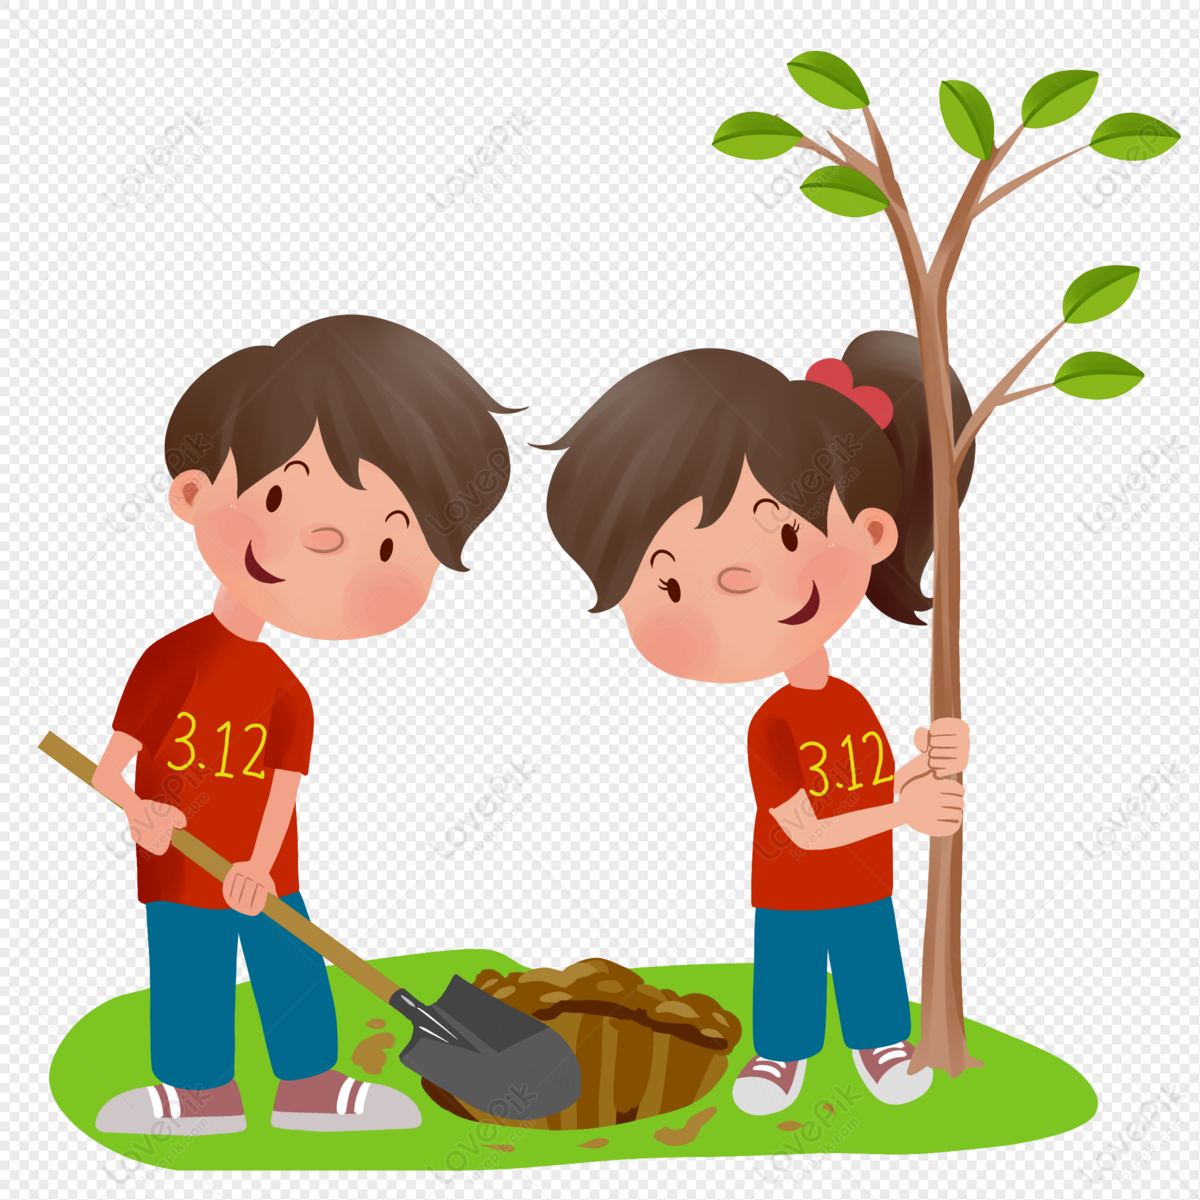 Planting Trees PNG Transparent Background And Clipart Image For Free  Download - Lovepik | 401213880